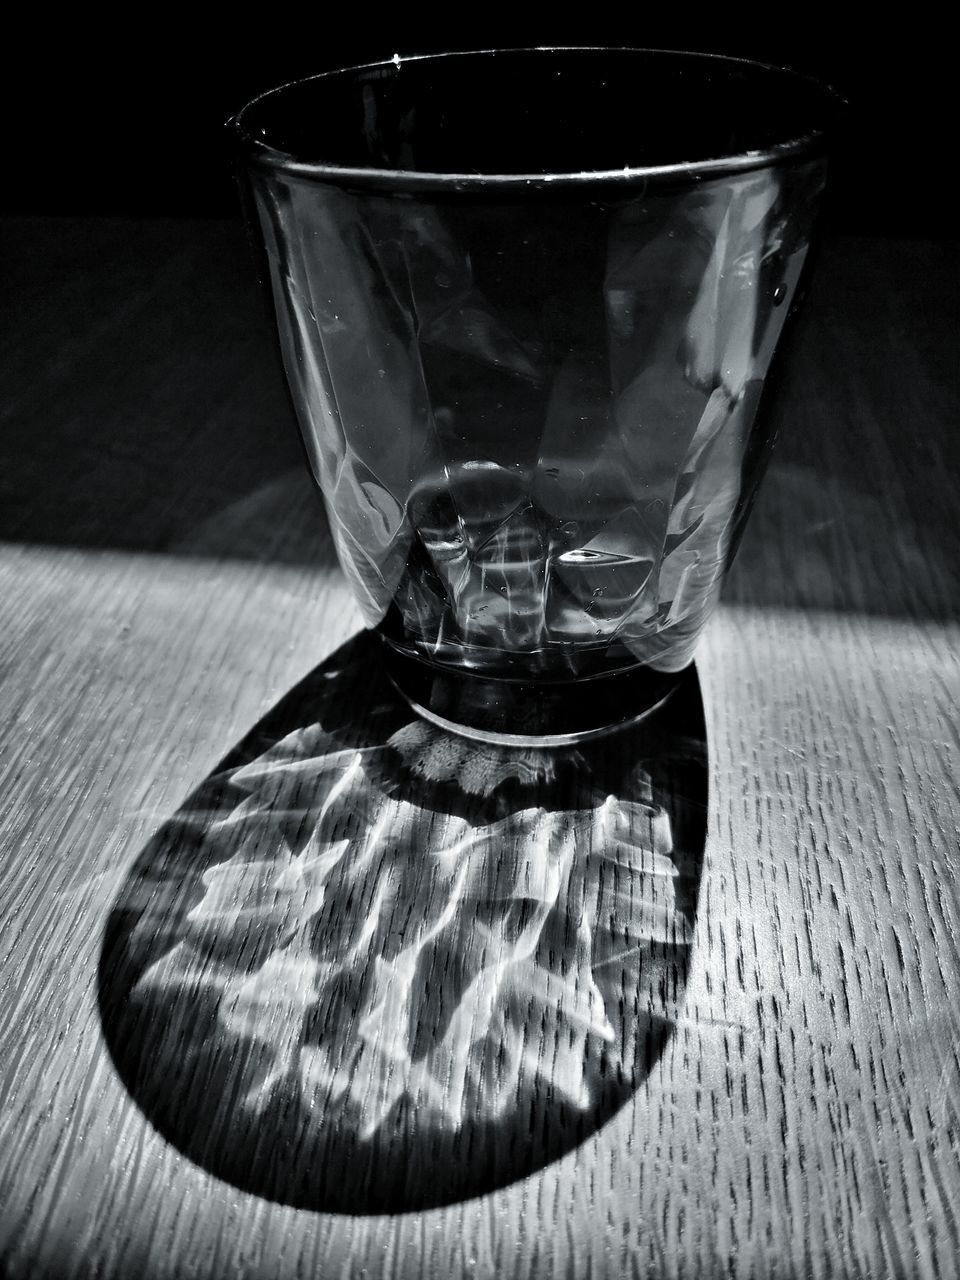 CLOSE-UP OF EMPTY GLASS ON TABLE